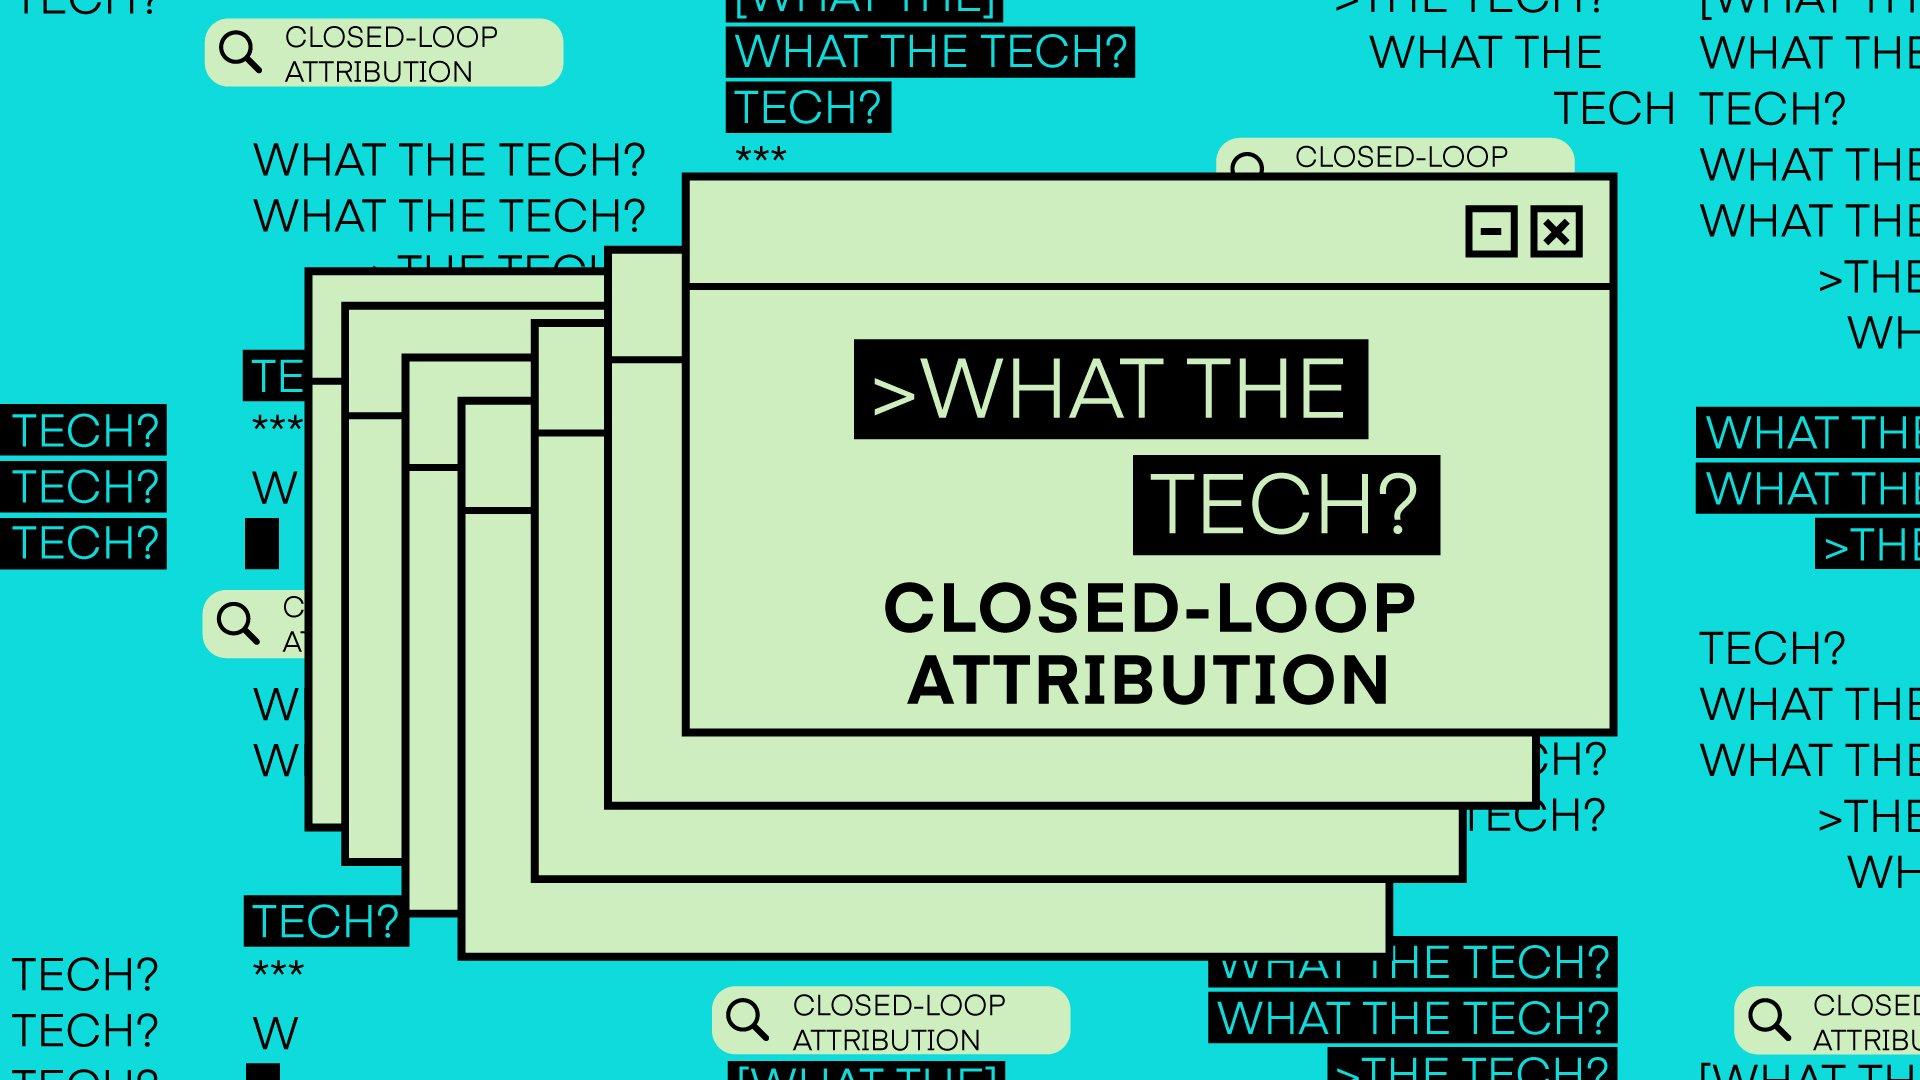 What the Tech is closed-loop attribution?